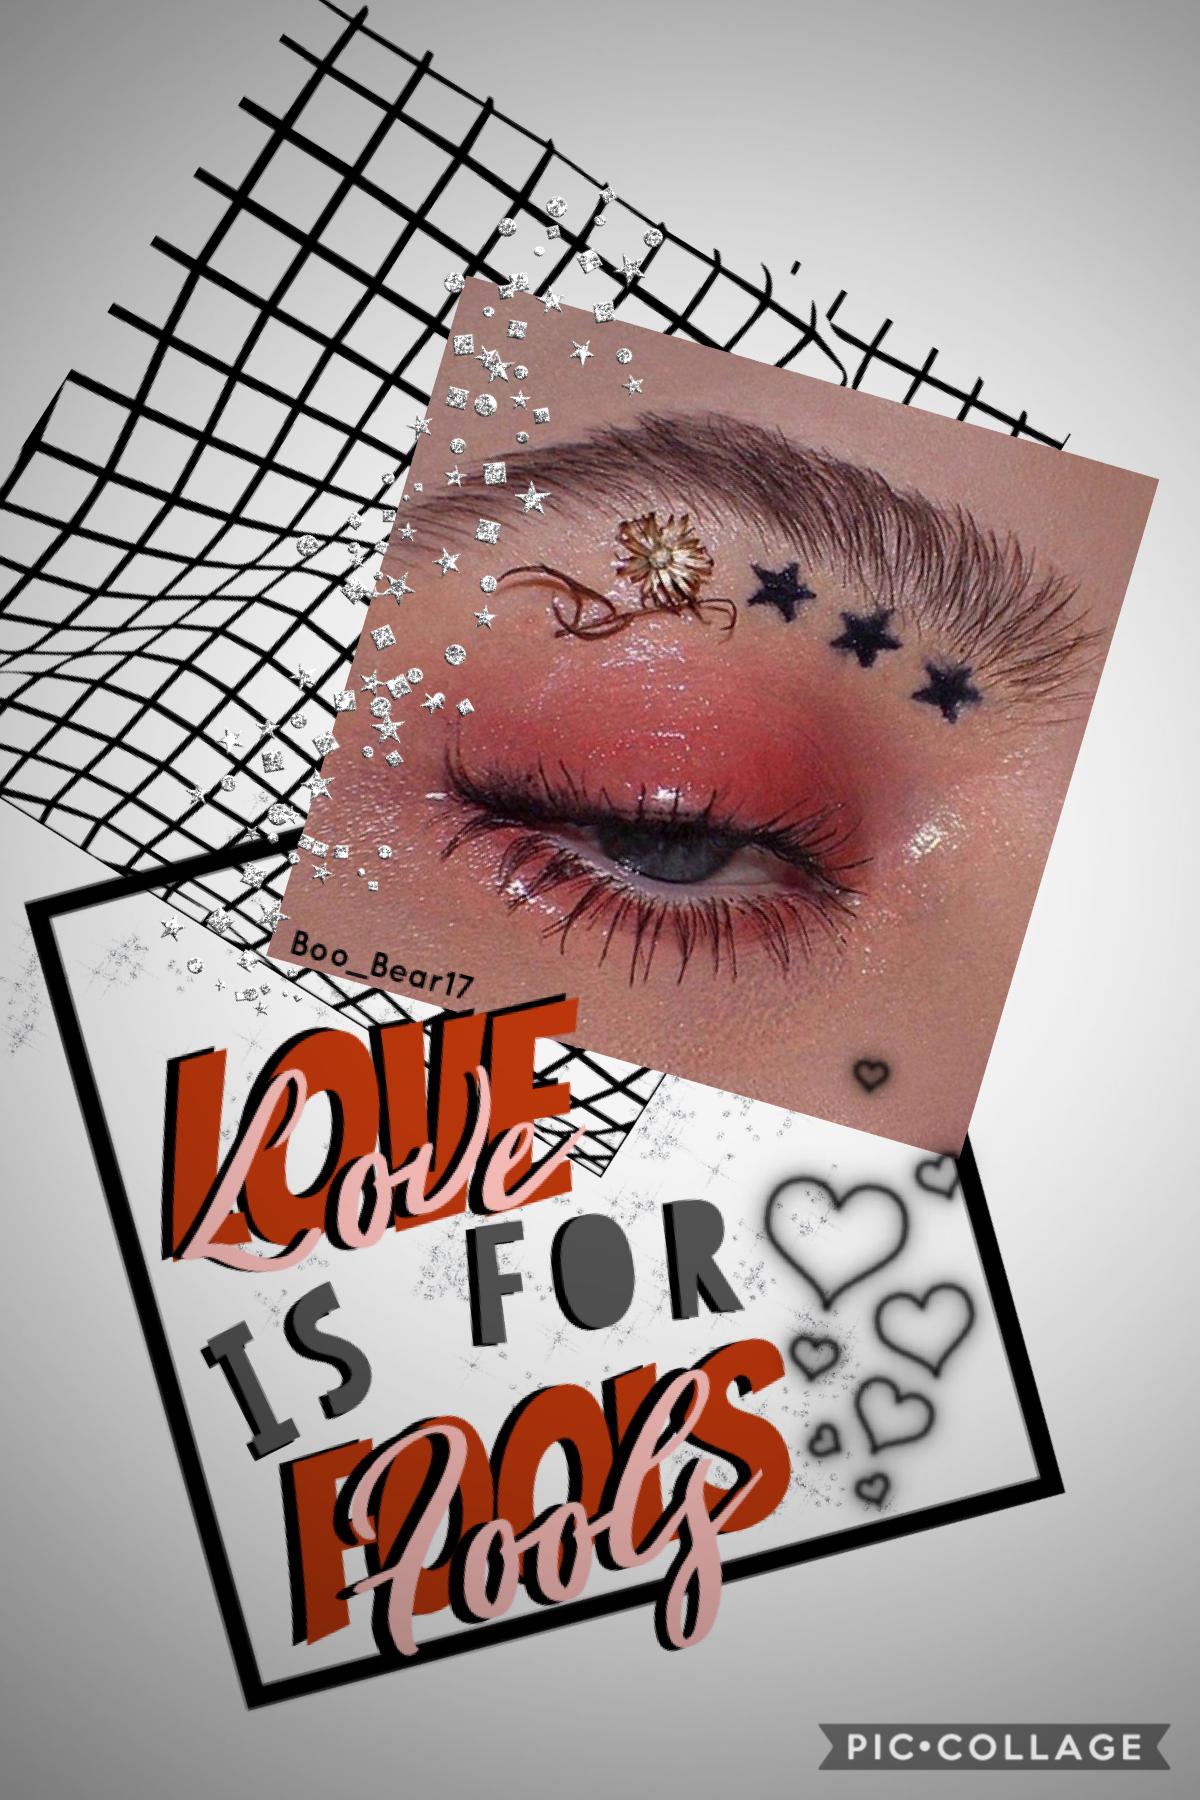 💔Love is for fools💔
•late Anti-Valentine’s day edit
•at work so I’ll be responding to all rps later
•song rec: Feeling Whitney by Post Malone